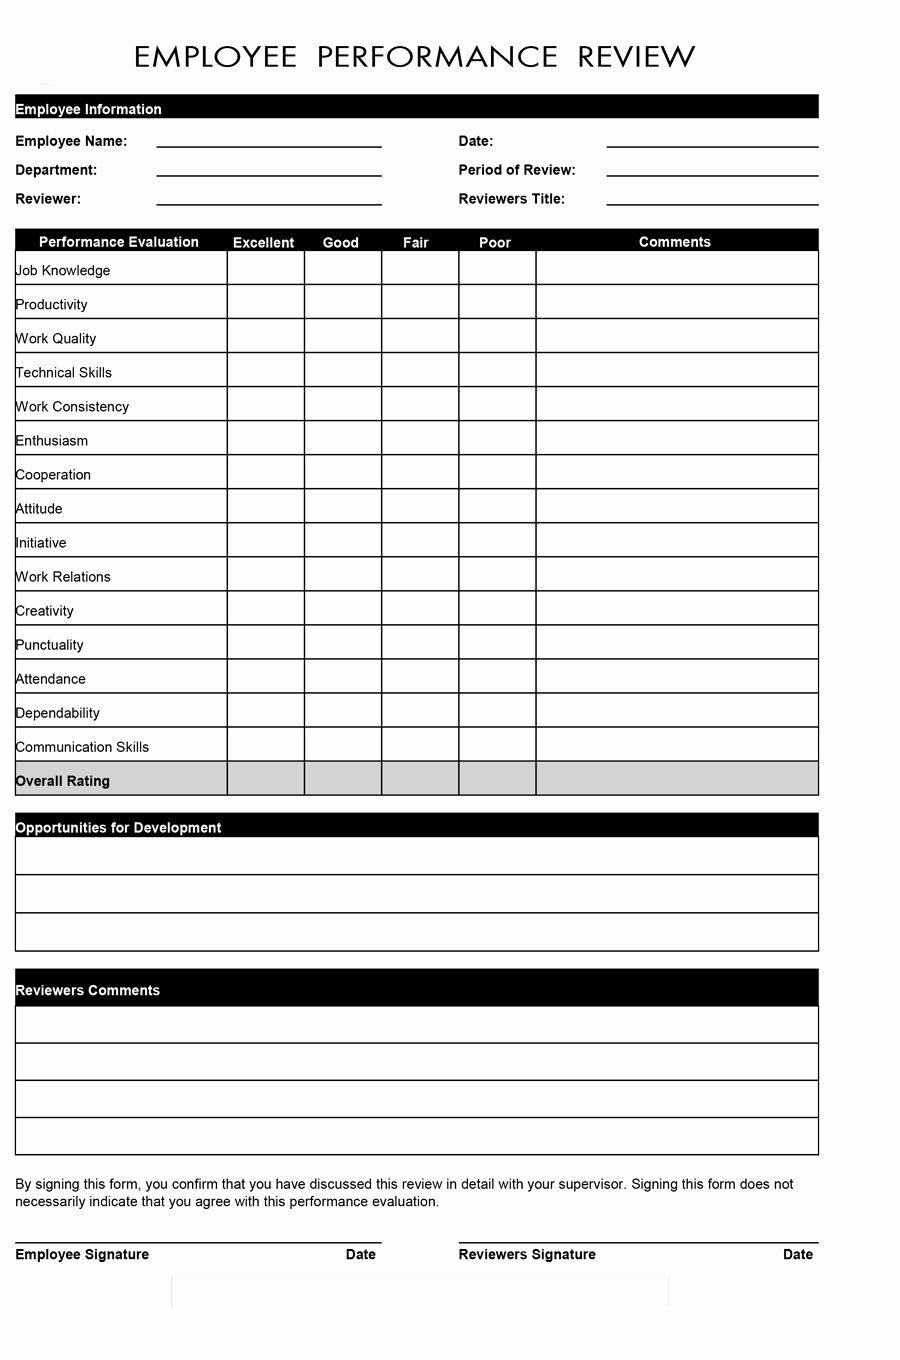 Sales associate Performance Review Examples Fresh 46 Employee Evaluation forms &amp; Performance Review Examples